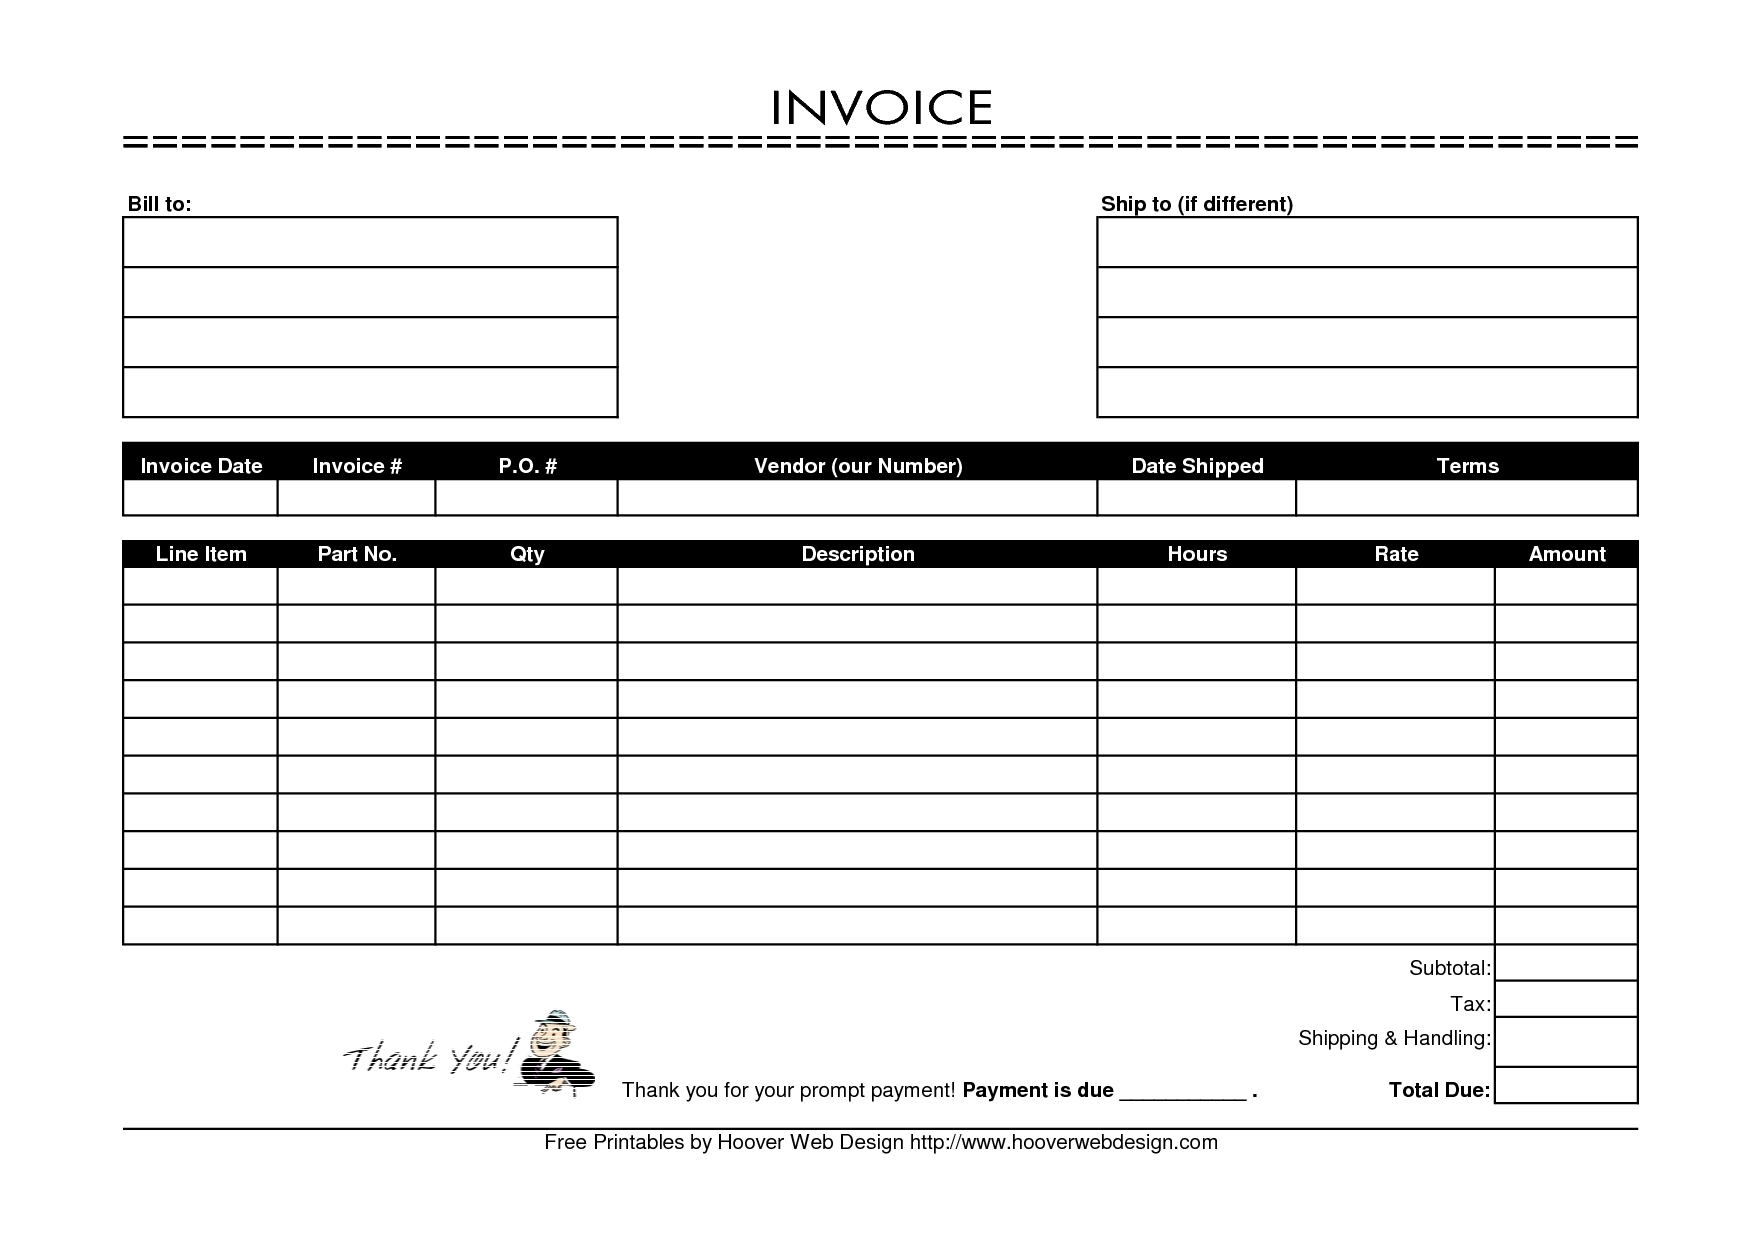 printable invoice forms for free invoice template free 2016 printable blank invoice forms